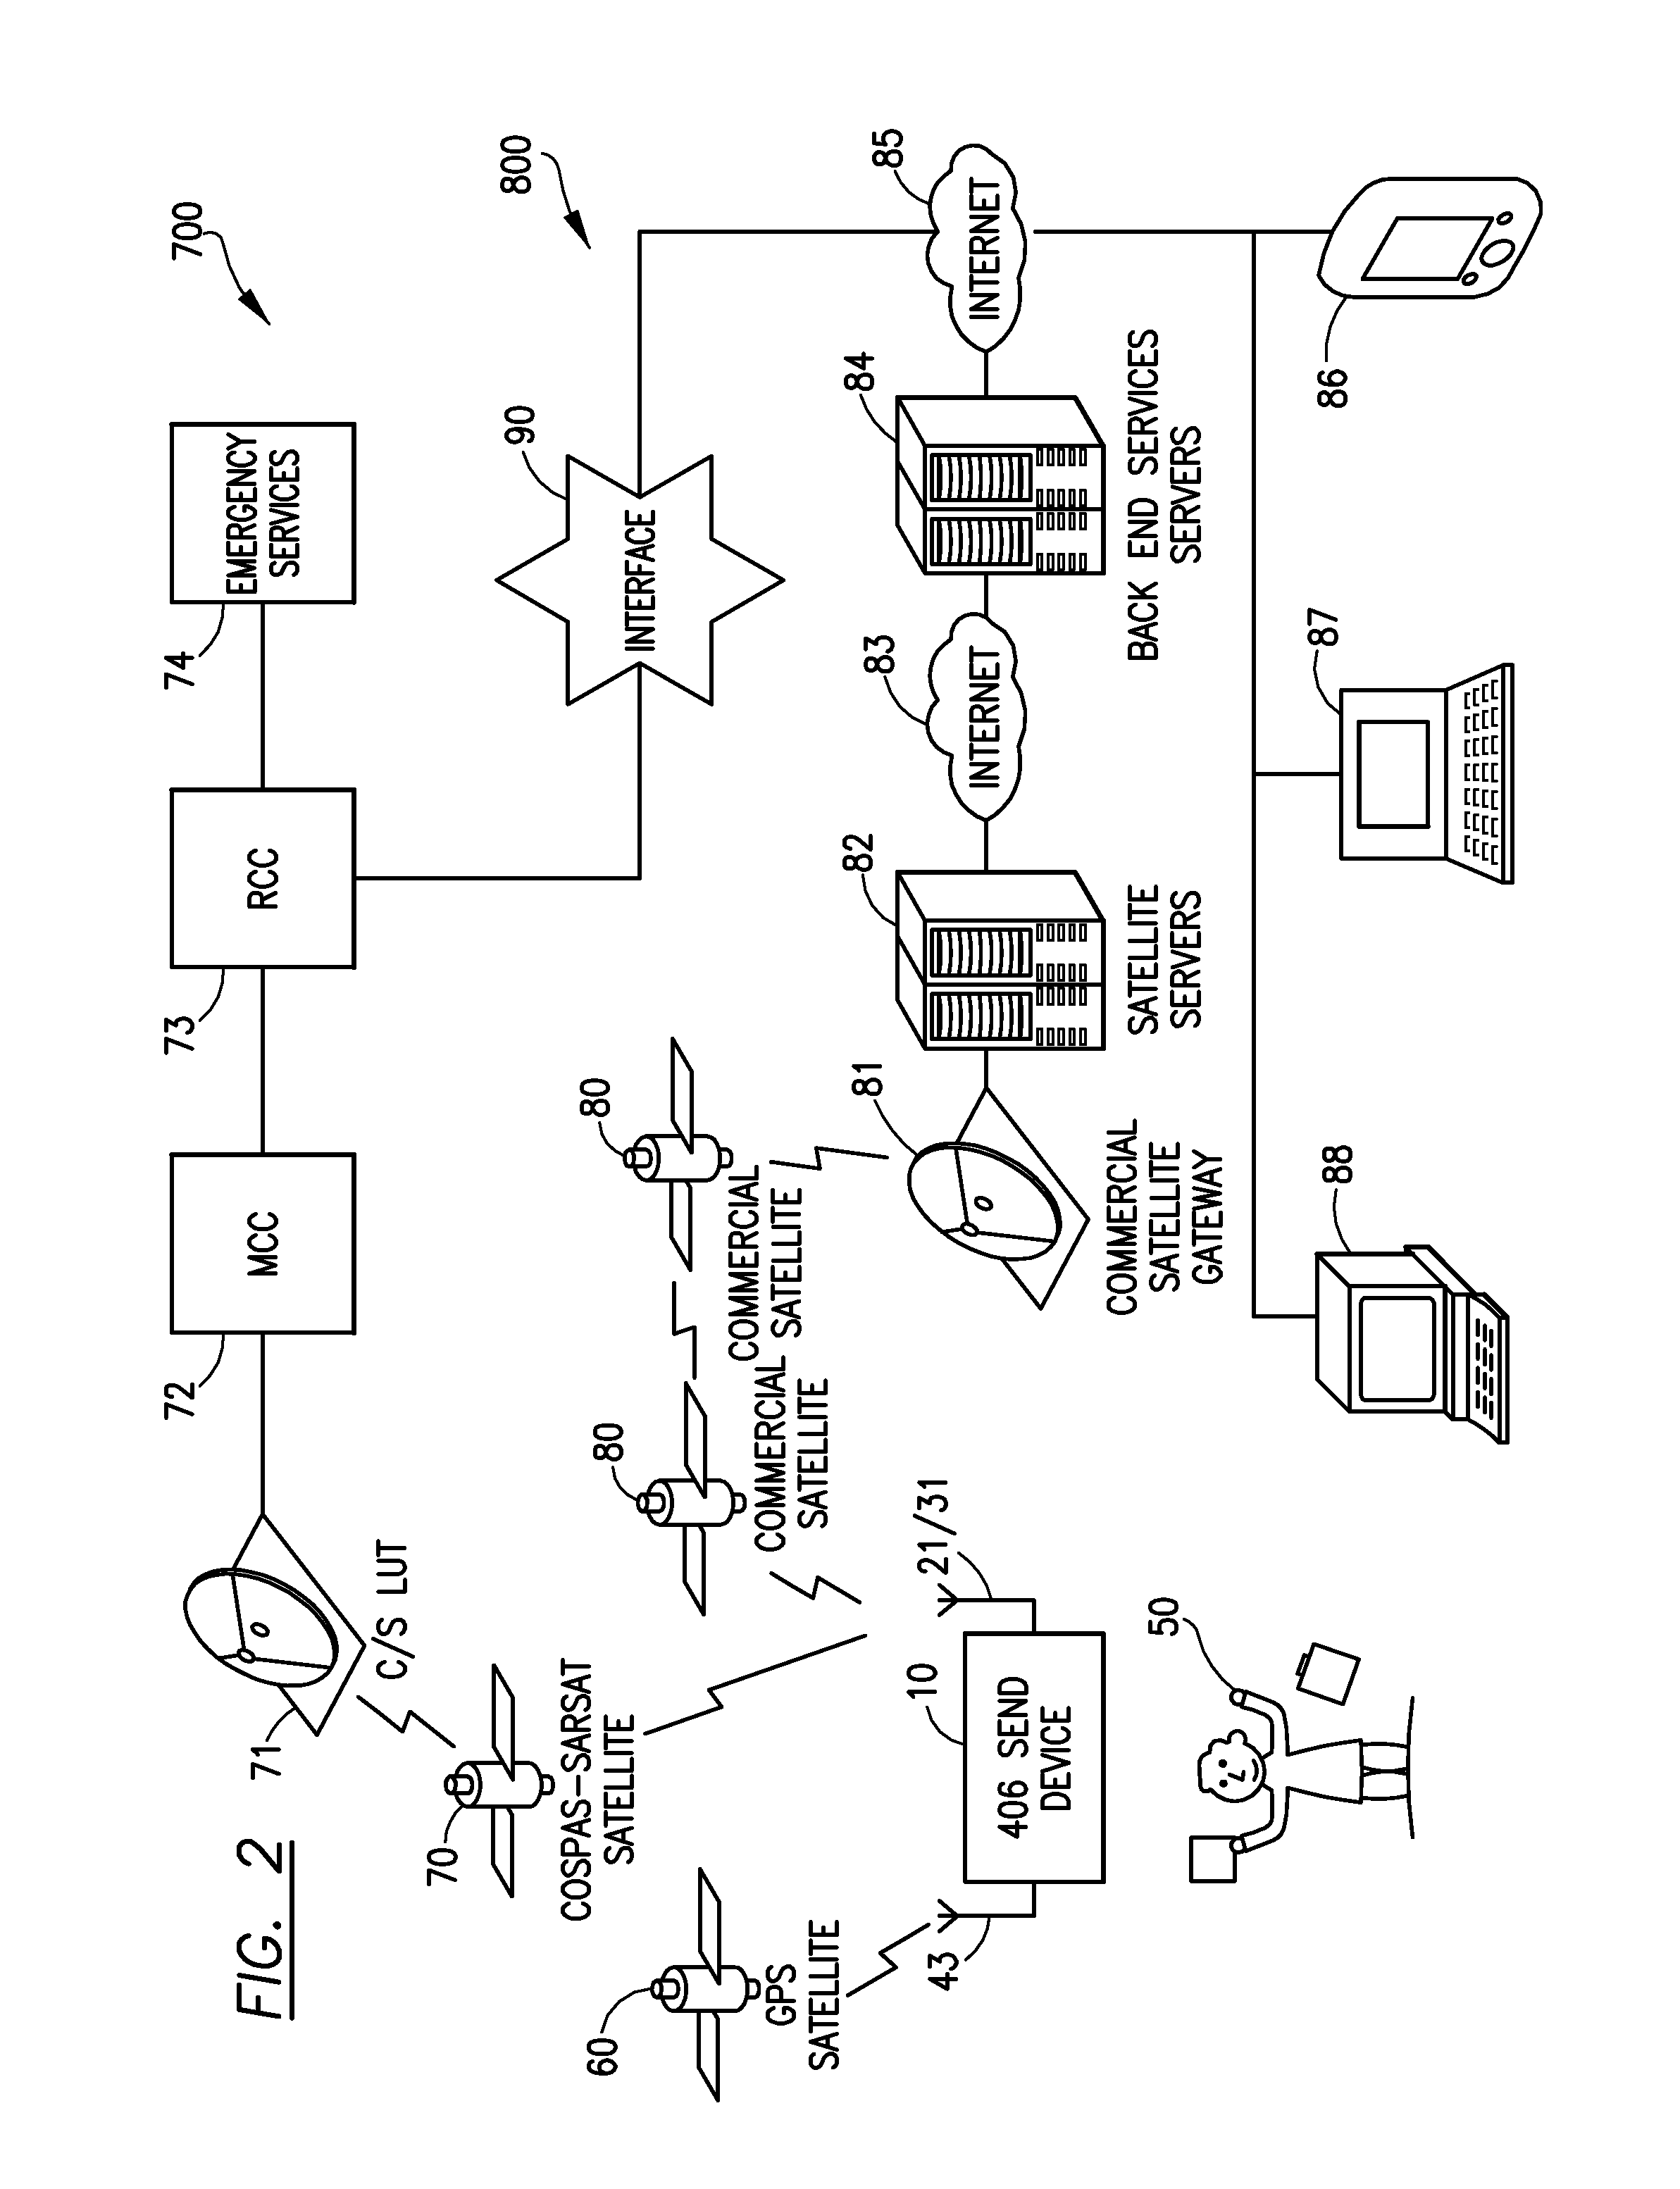 Dual-satellite emergency locator beacon and method for registering, programming and updating emergency locator beacon over the air